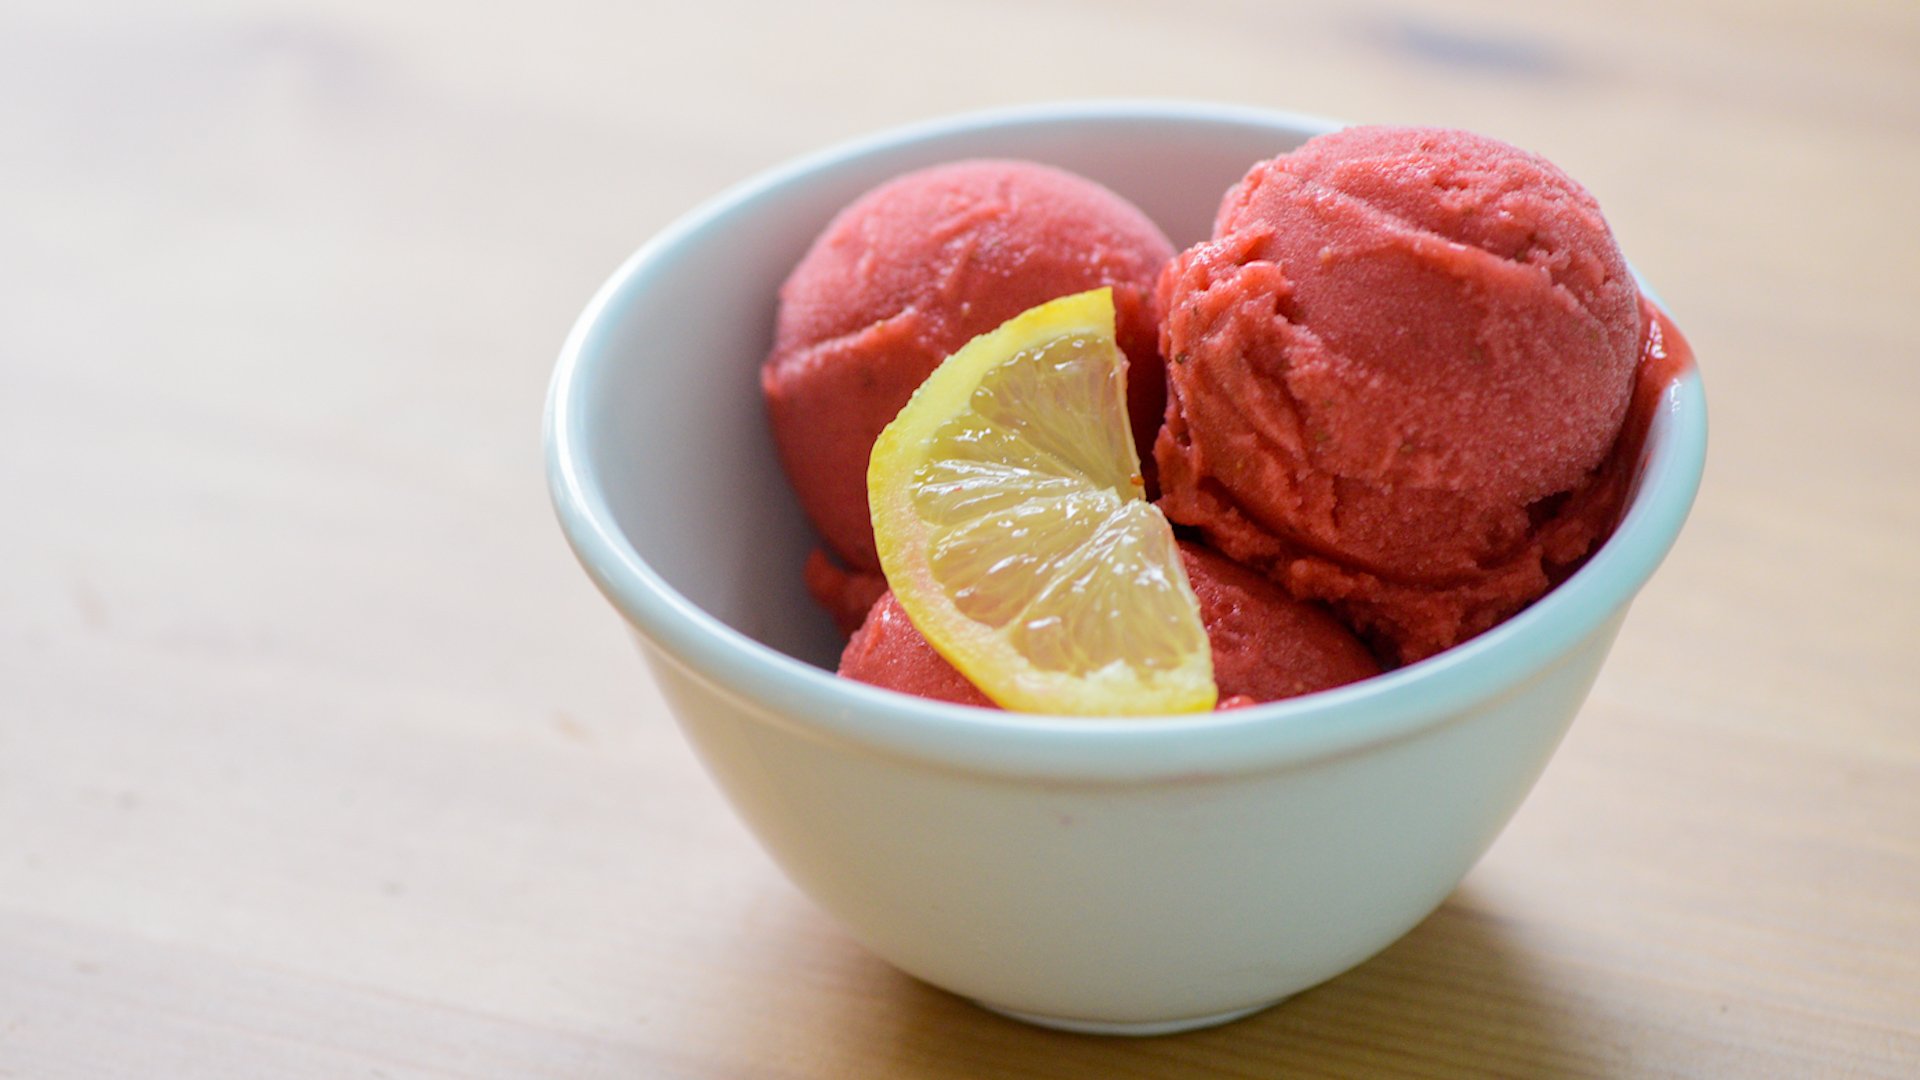 Mango and strawberry sorbets